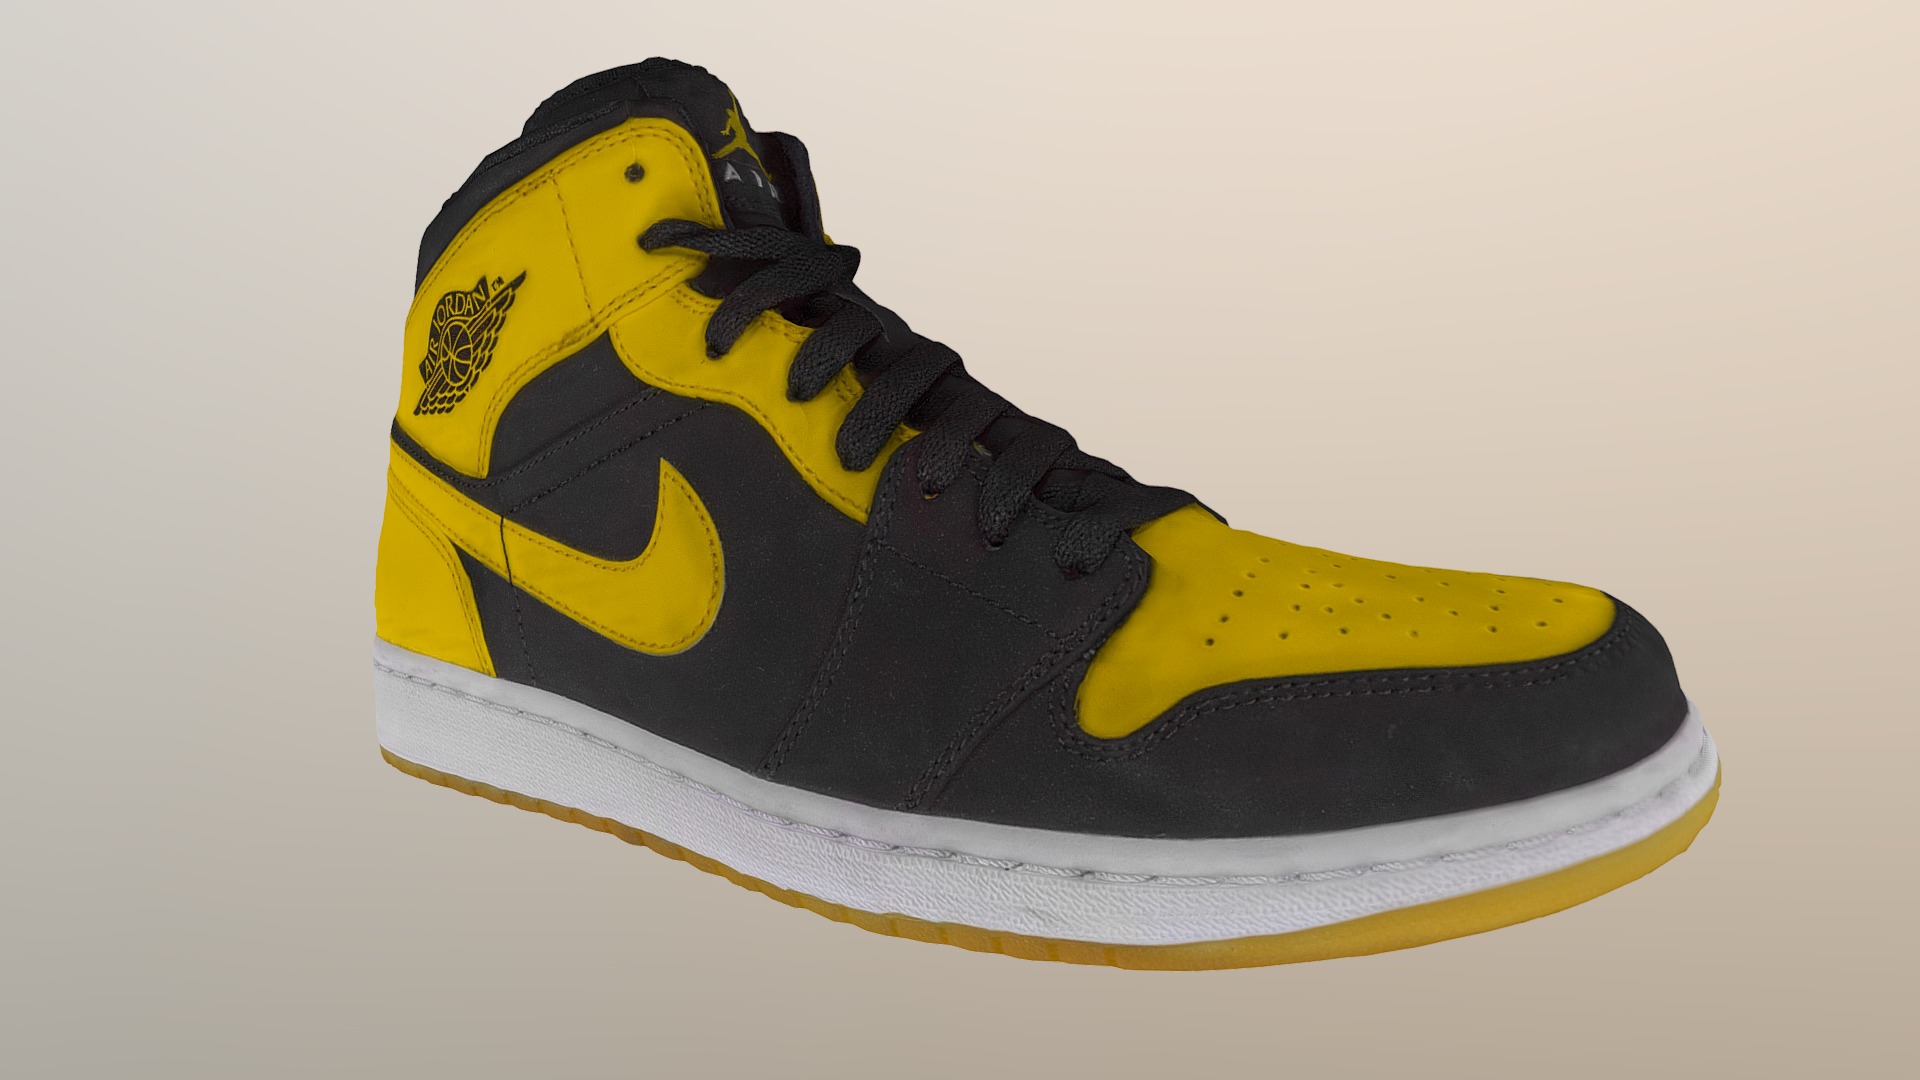 3D model Nike Yellow Air Force One Sneakers Shoes - This is a 3D model of the Nike Yellow Air Force One Sneakers Shoes. The 3D model is about a yellow and black shoe.